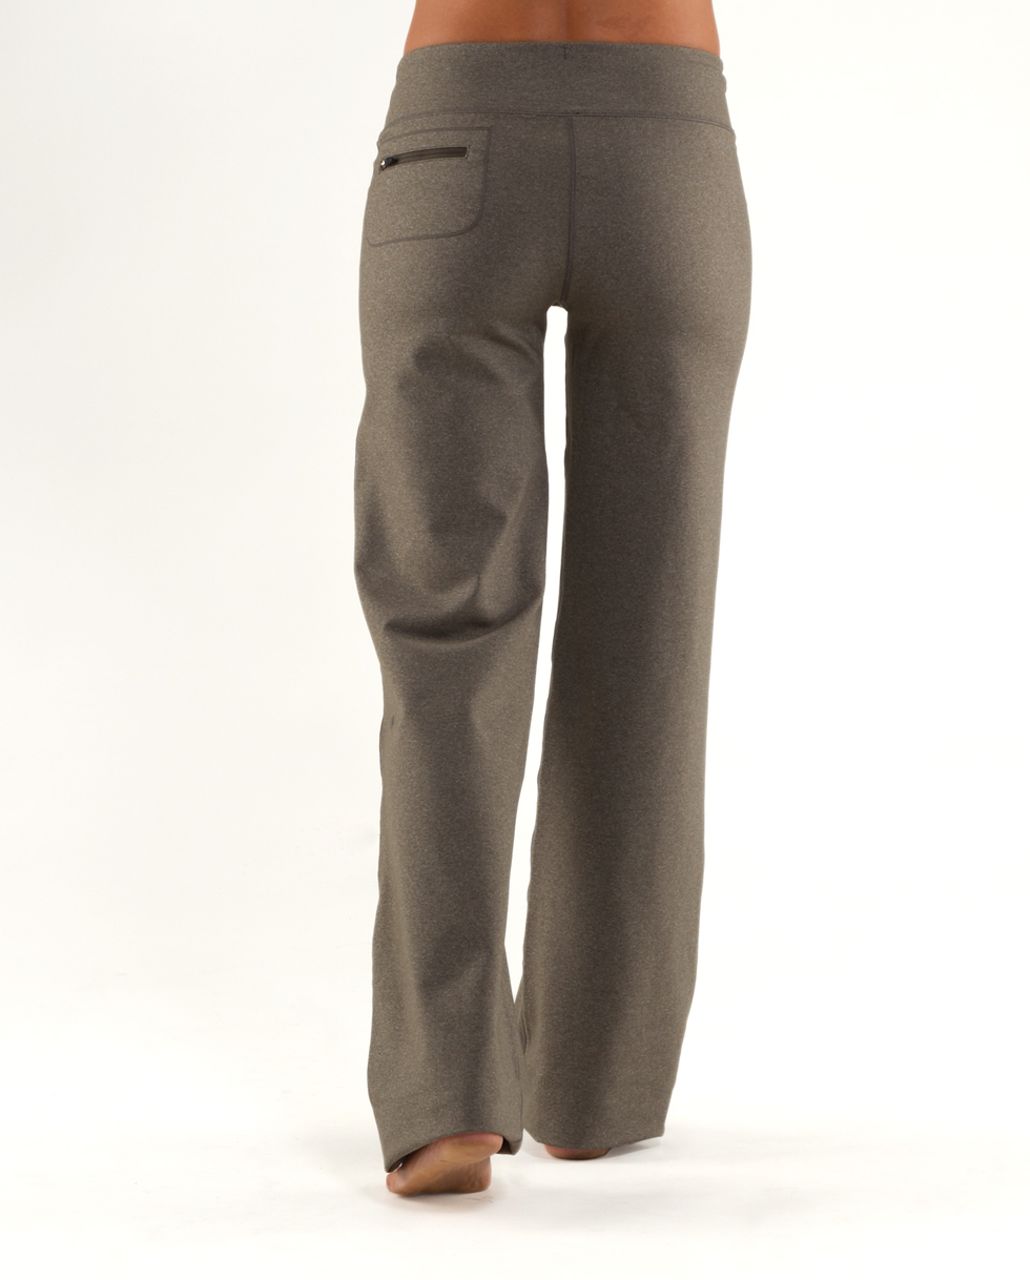 Lululemon Relaxed Fit Pant - Heathered Deep Camo